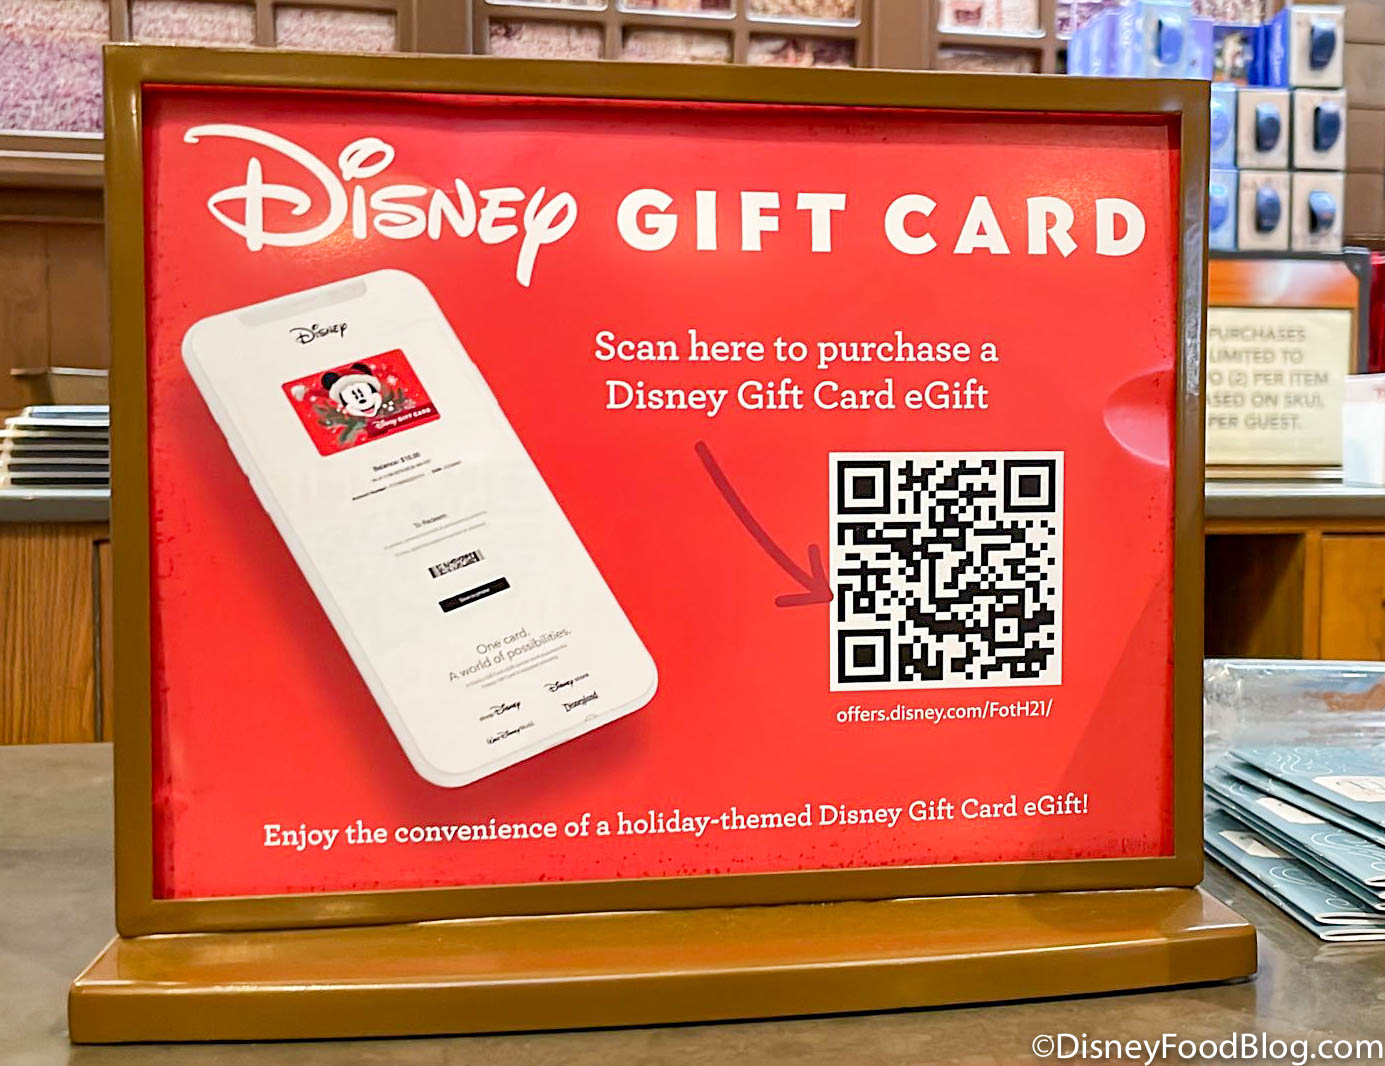 Gift card purchase: Card scan